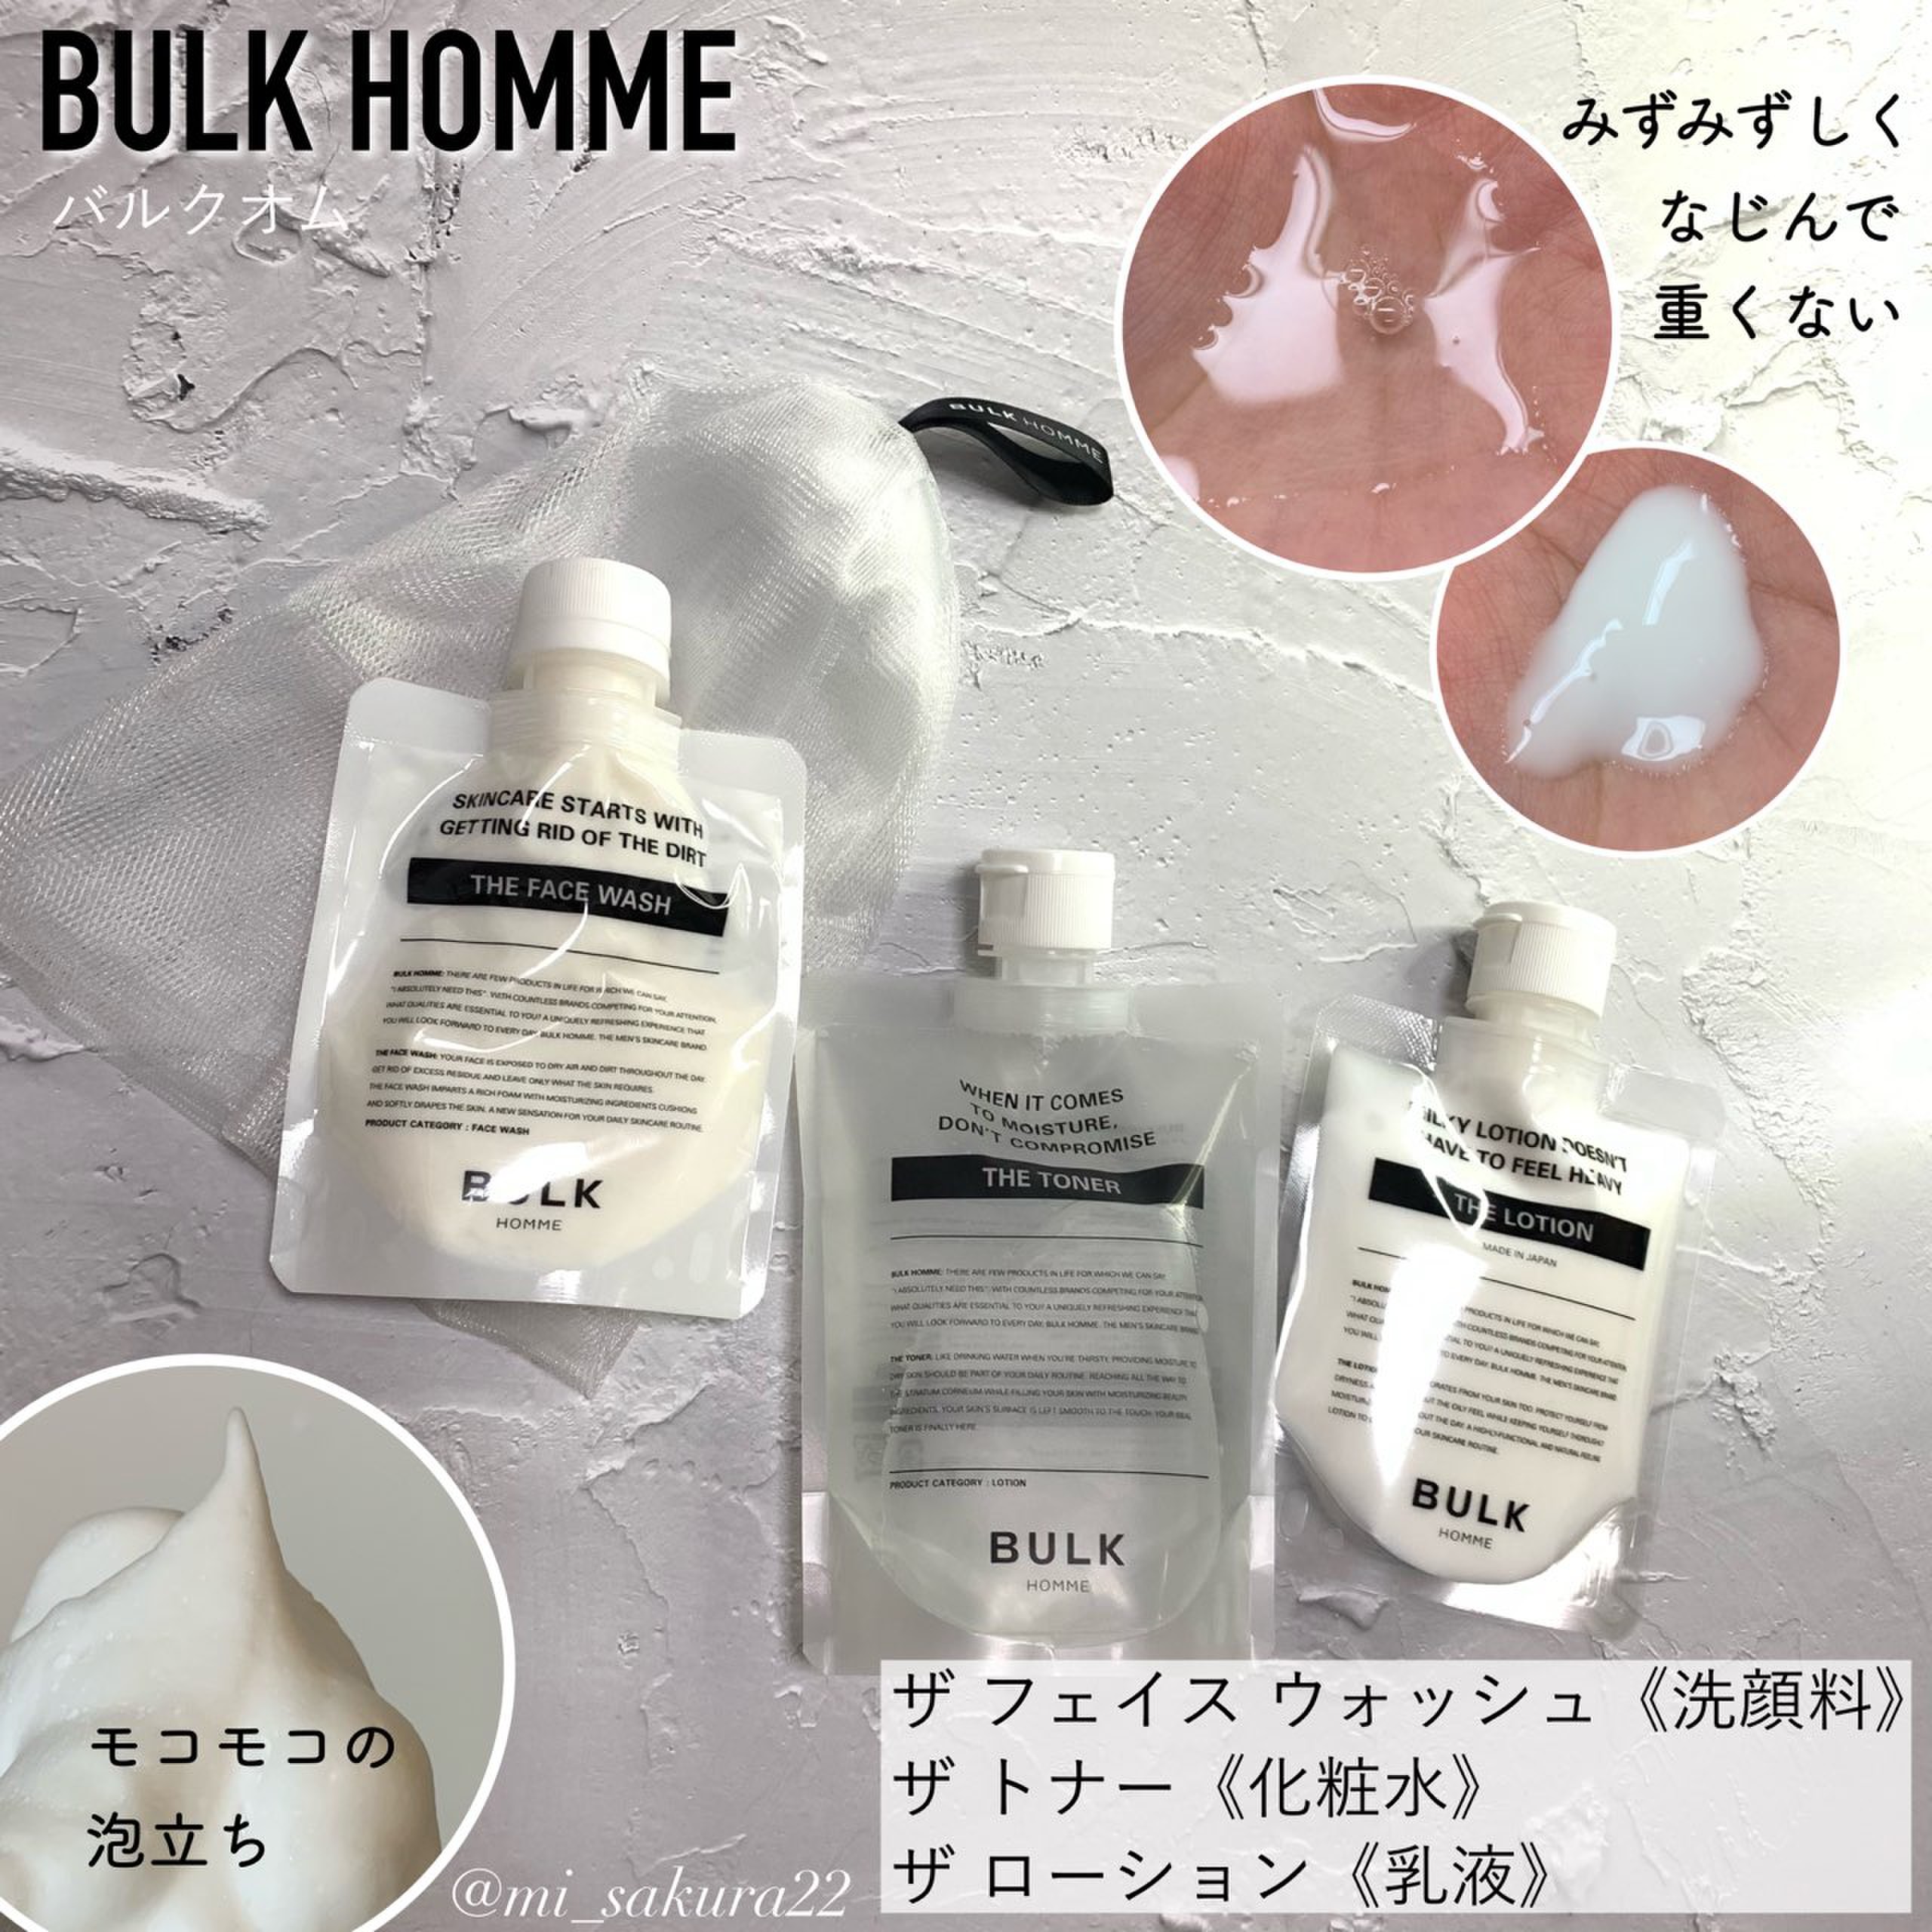 BULK HOMME THE LOTION 100g 2個セット - 乳液・ミルク